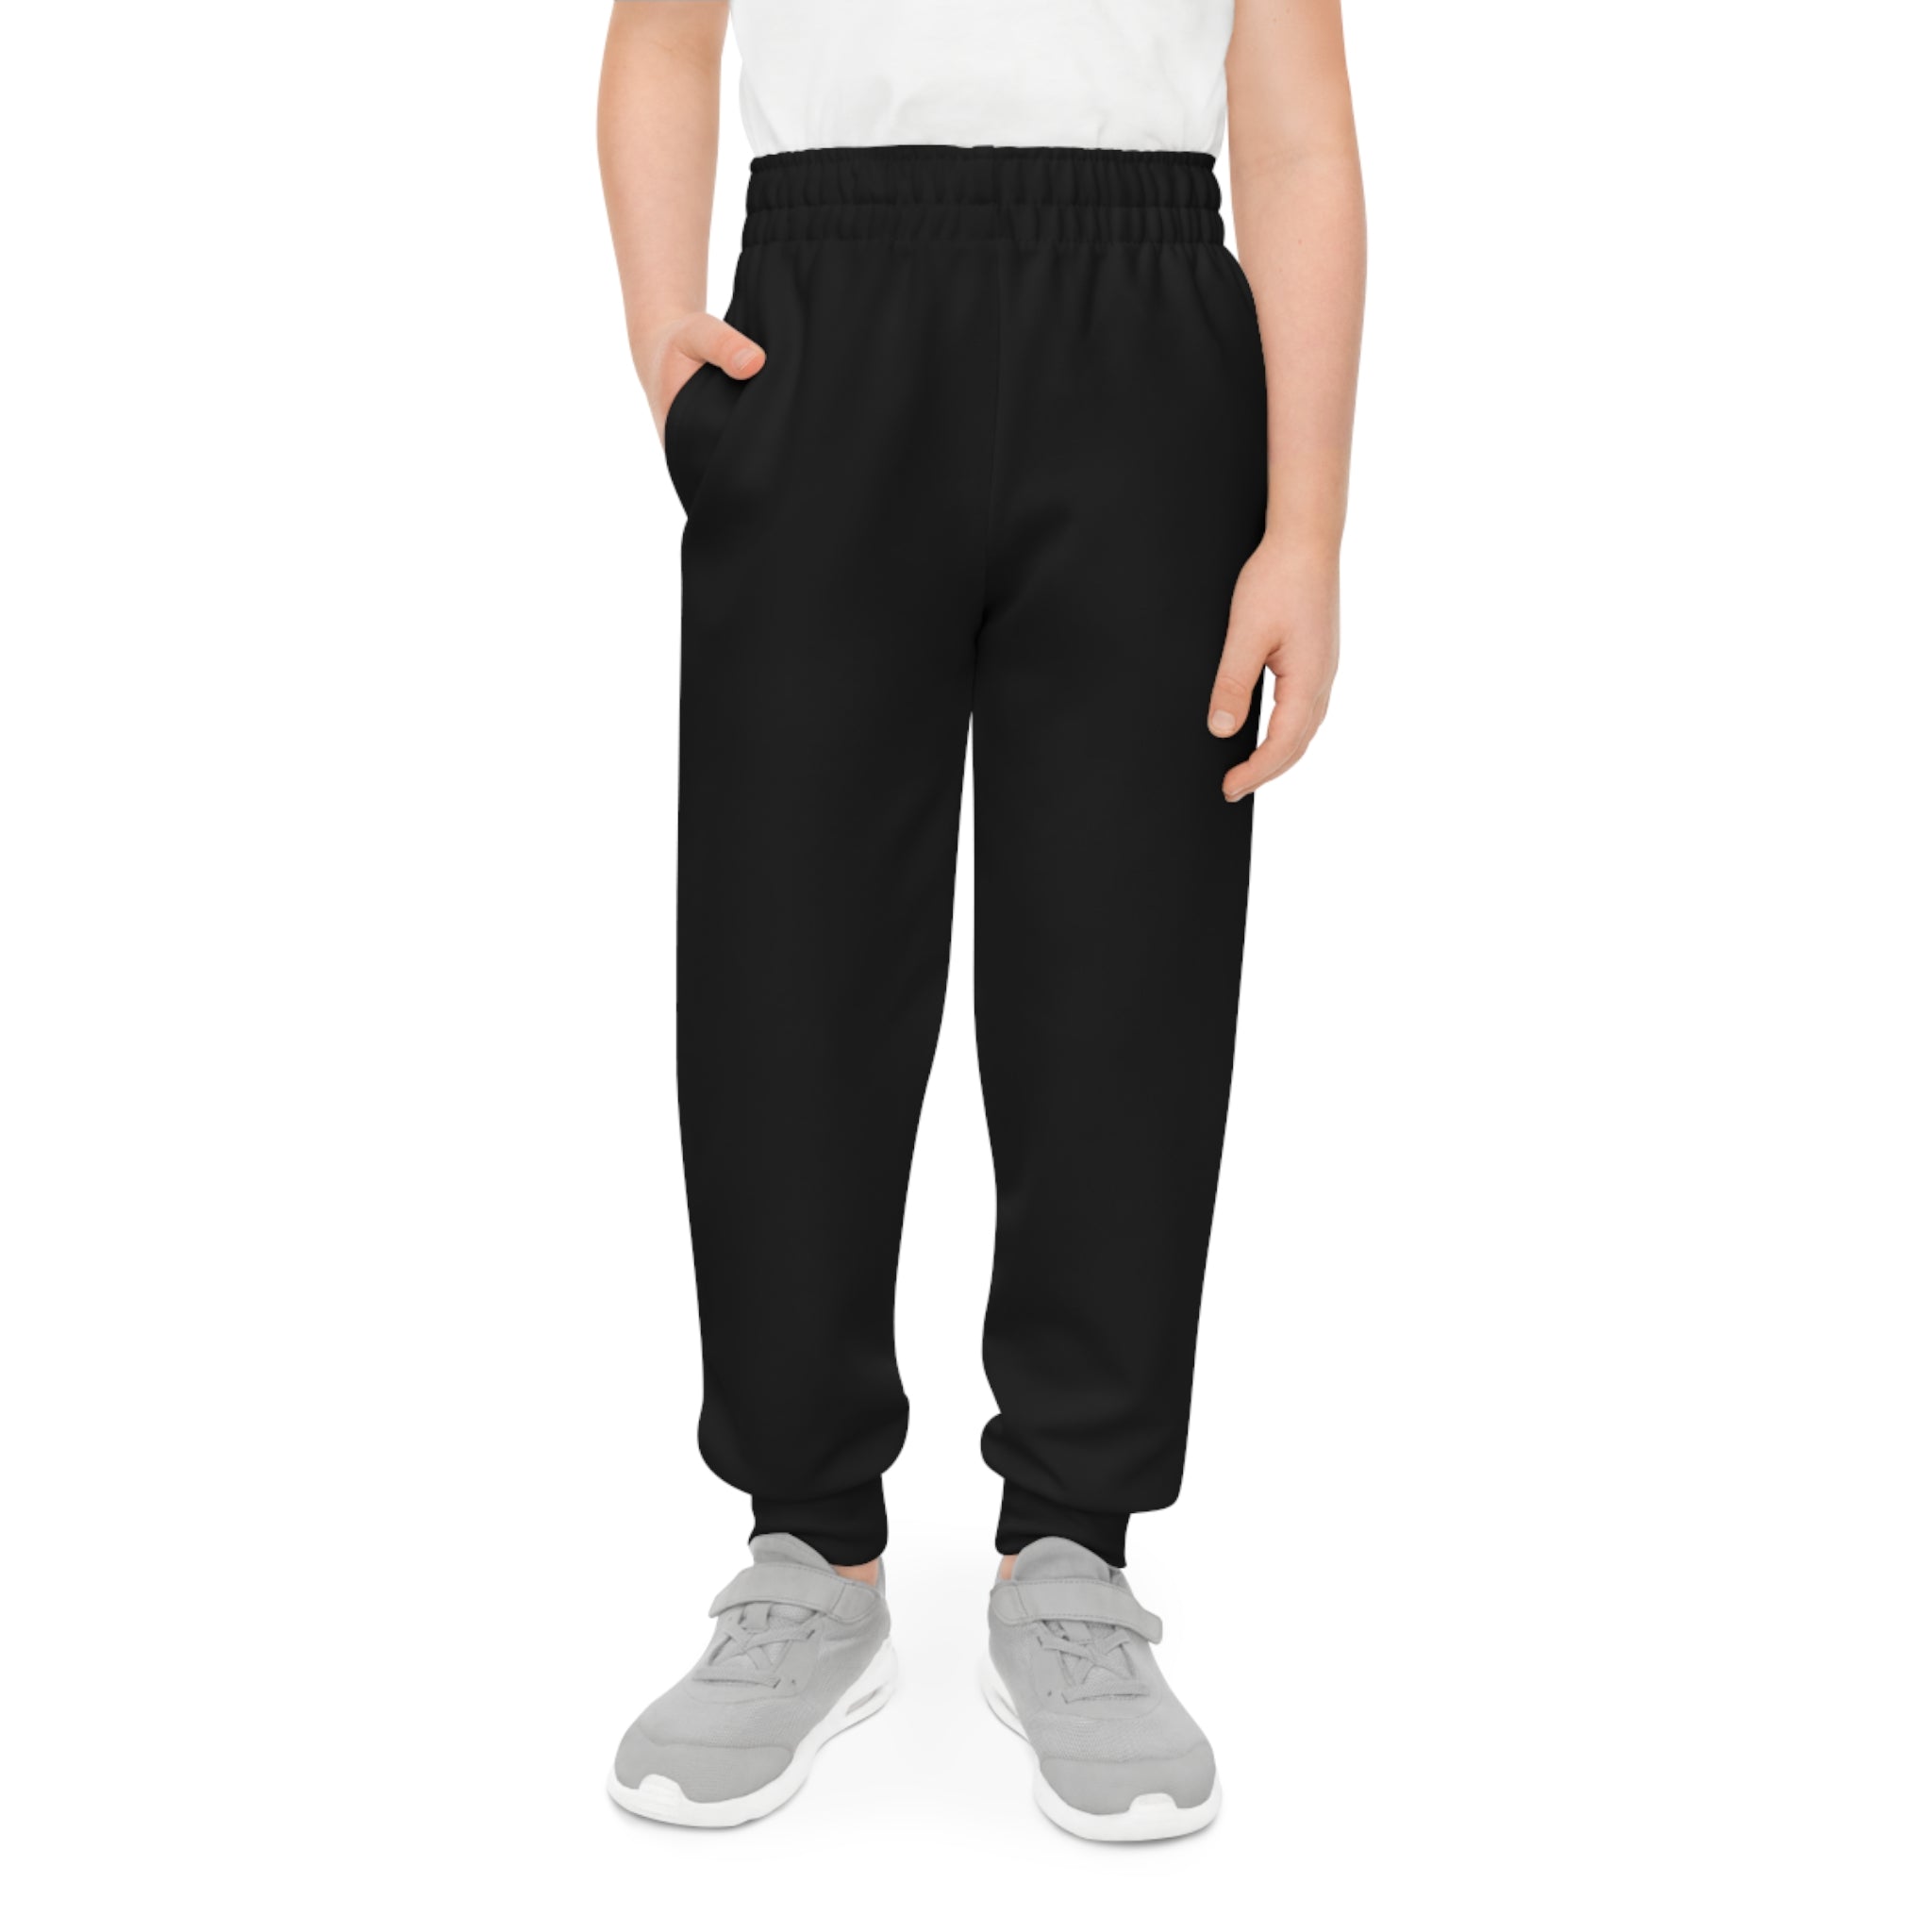 ONSTAGE Youth Joggers - White Logo